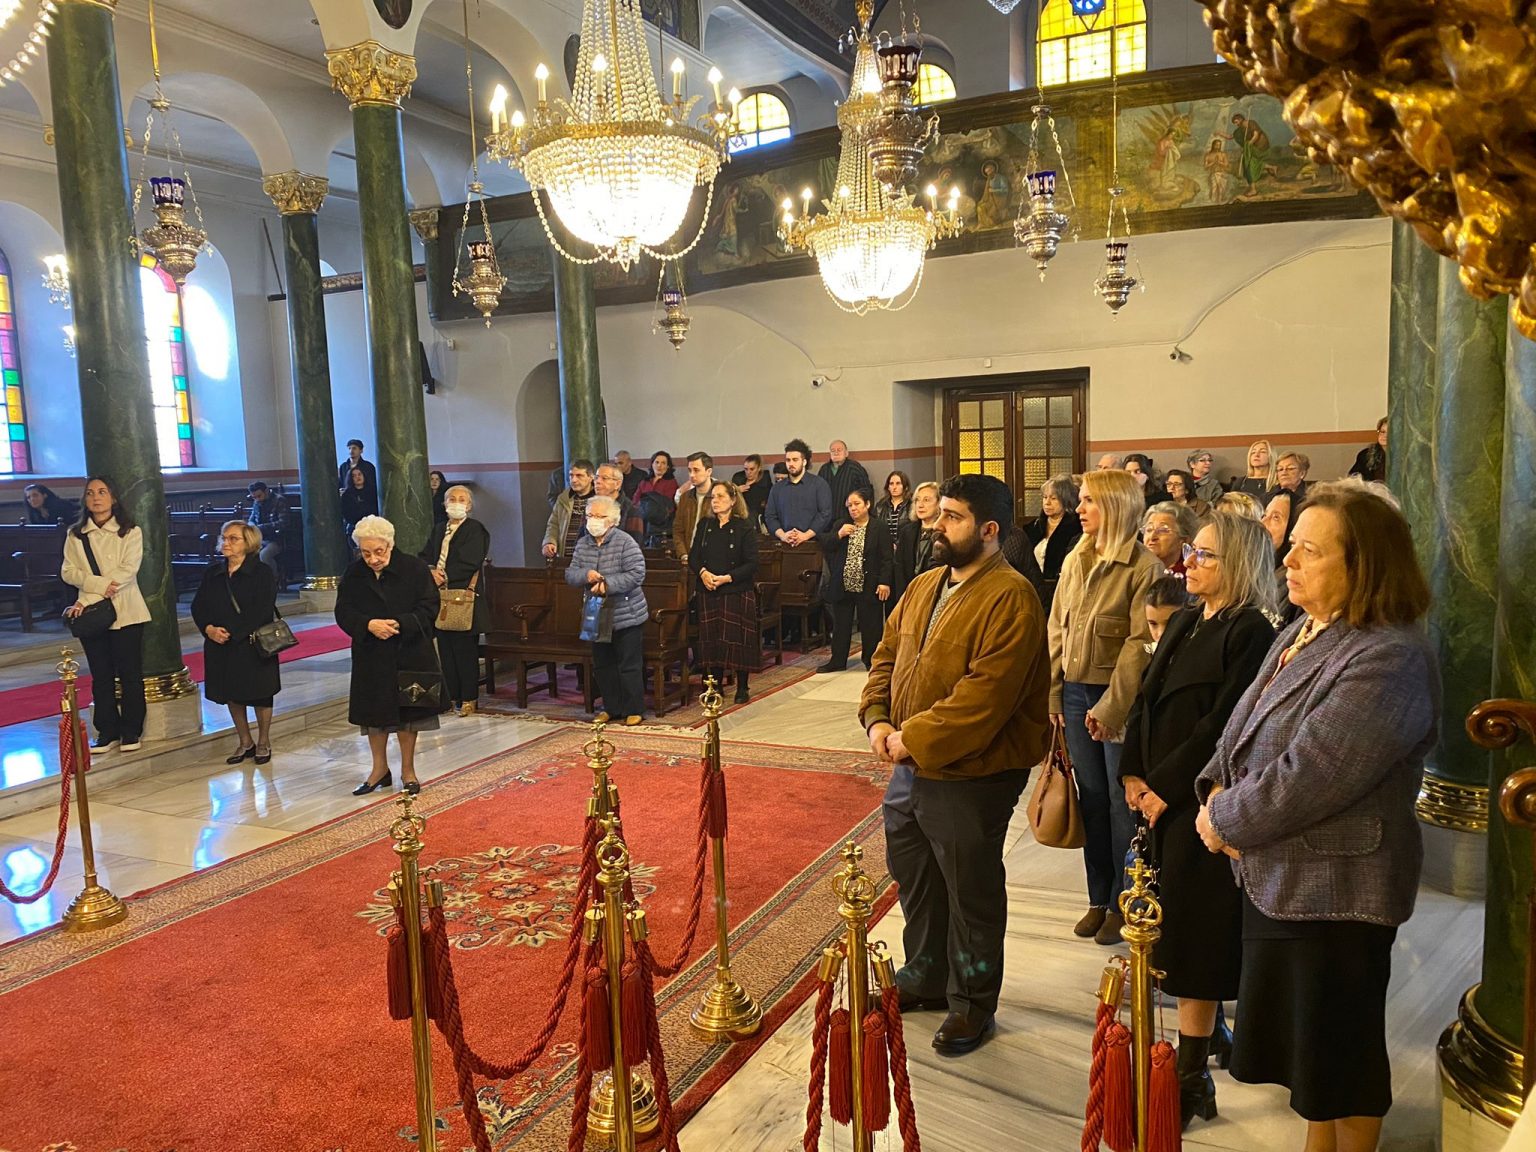 The Feast Day of Christmas at the Church of Saint Dimitrios in Tataoula, Constantinople